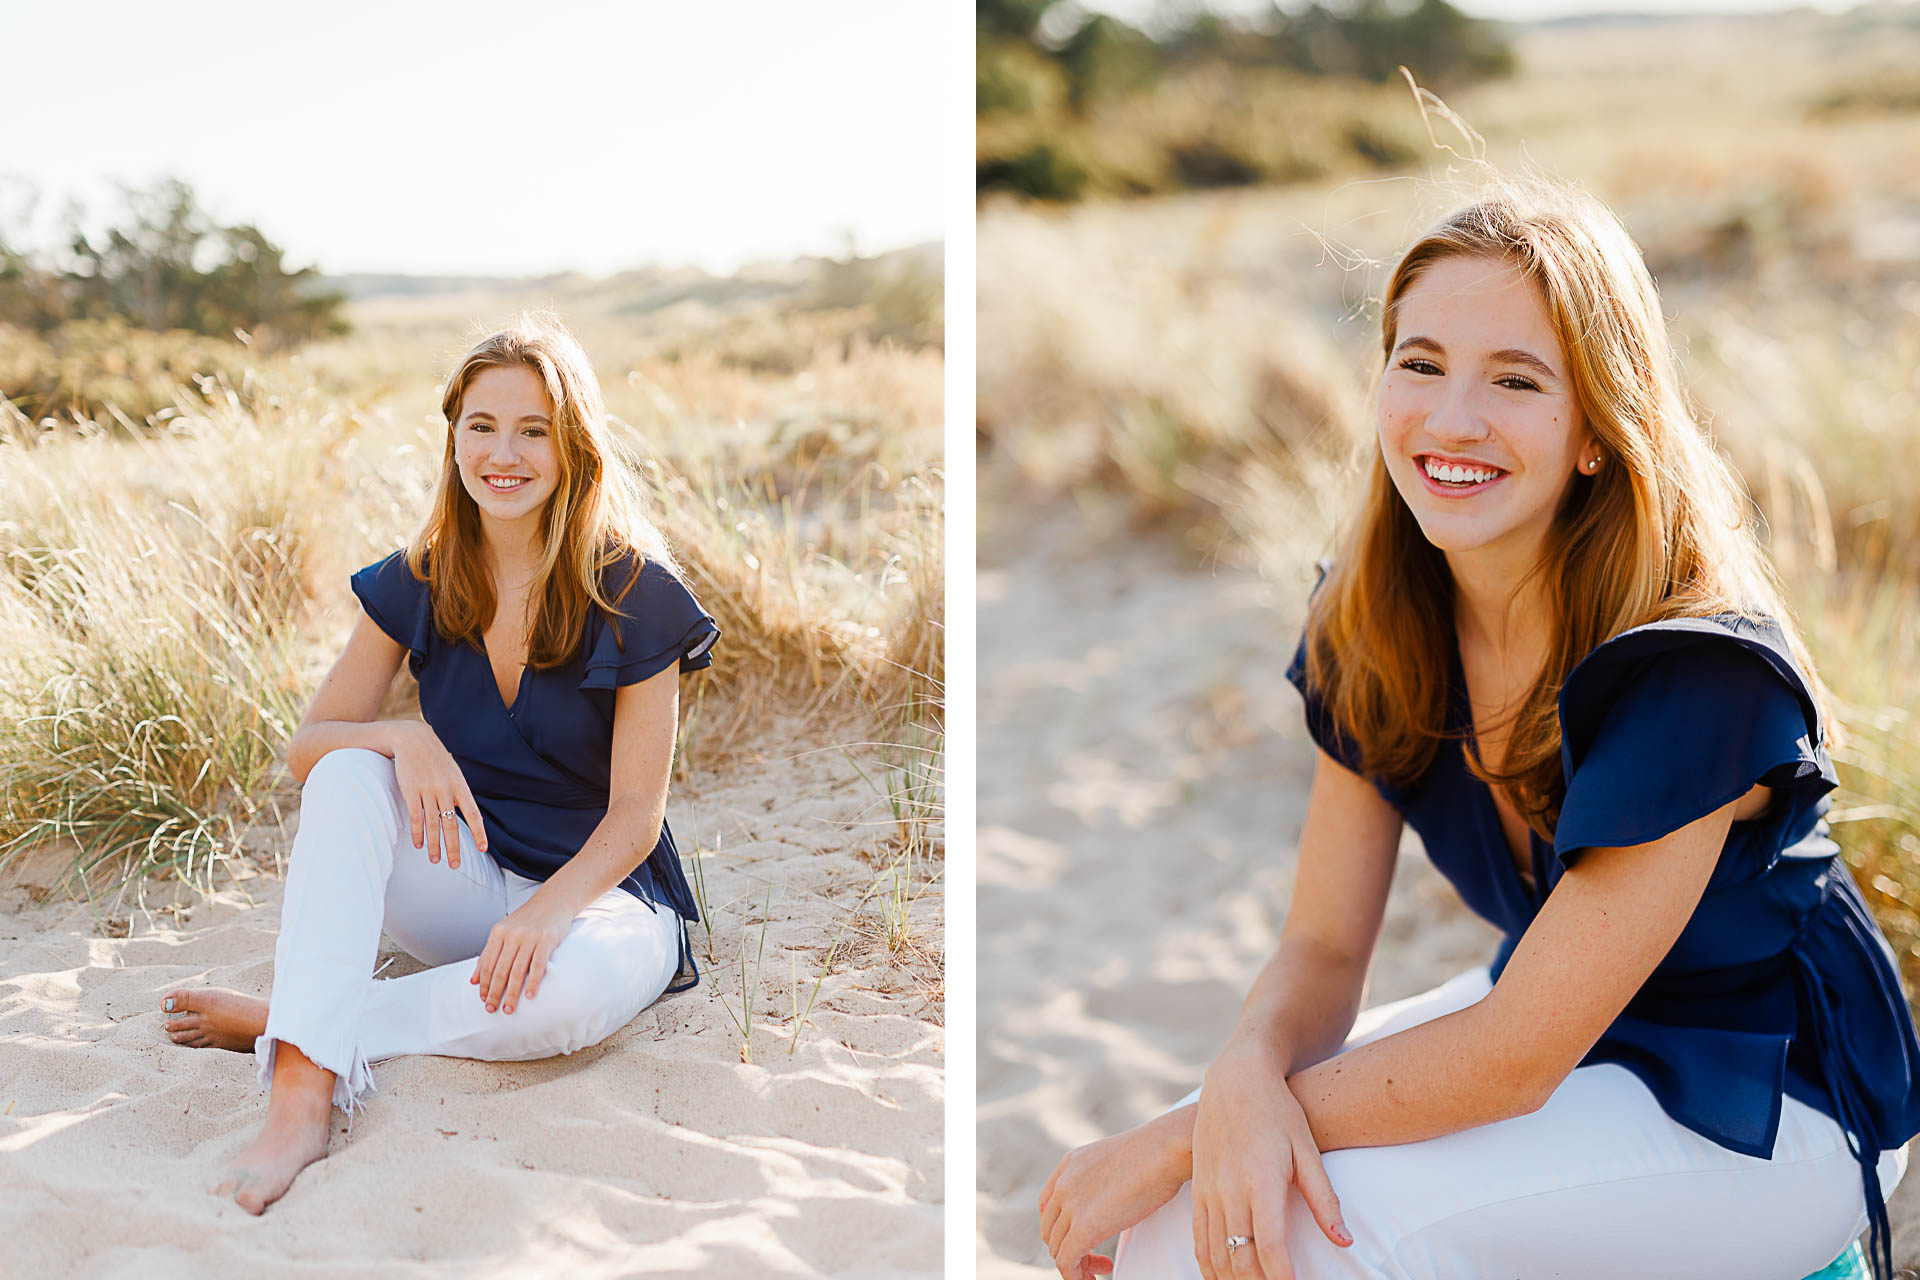 Photo by Cohasset senior photographer Christina Runnals | High school senior girl sitting in front of beach grass and smiling